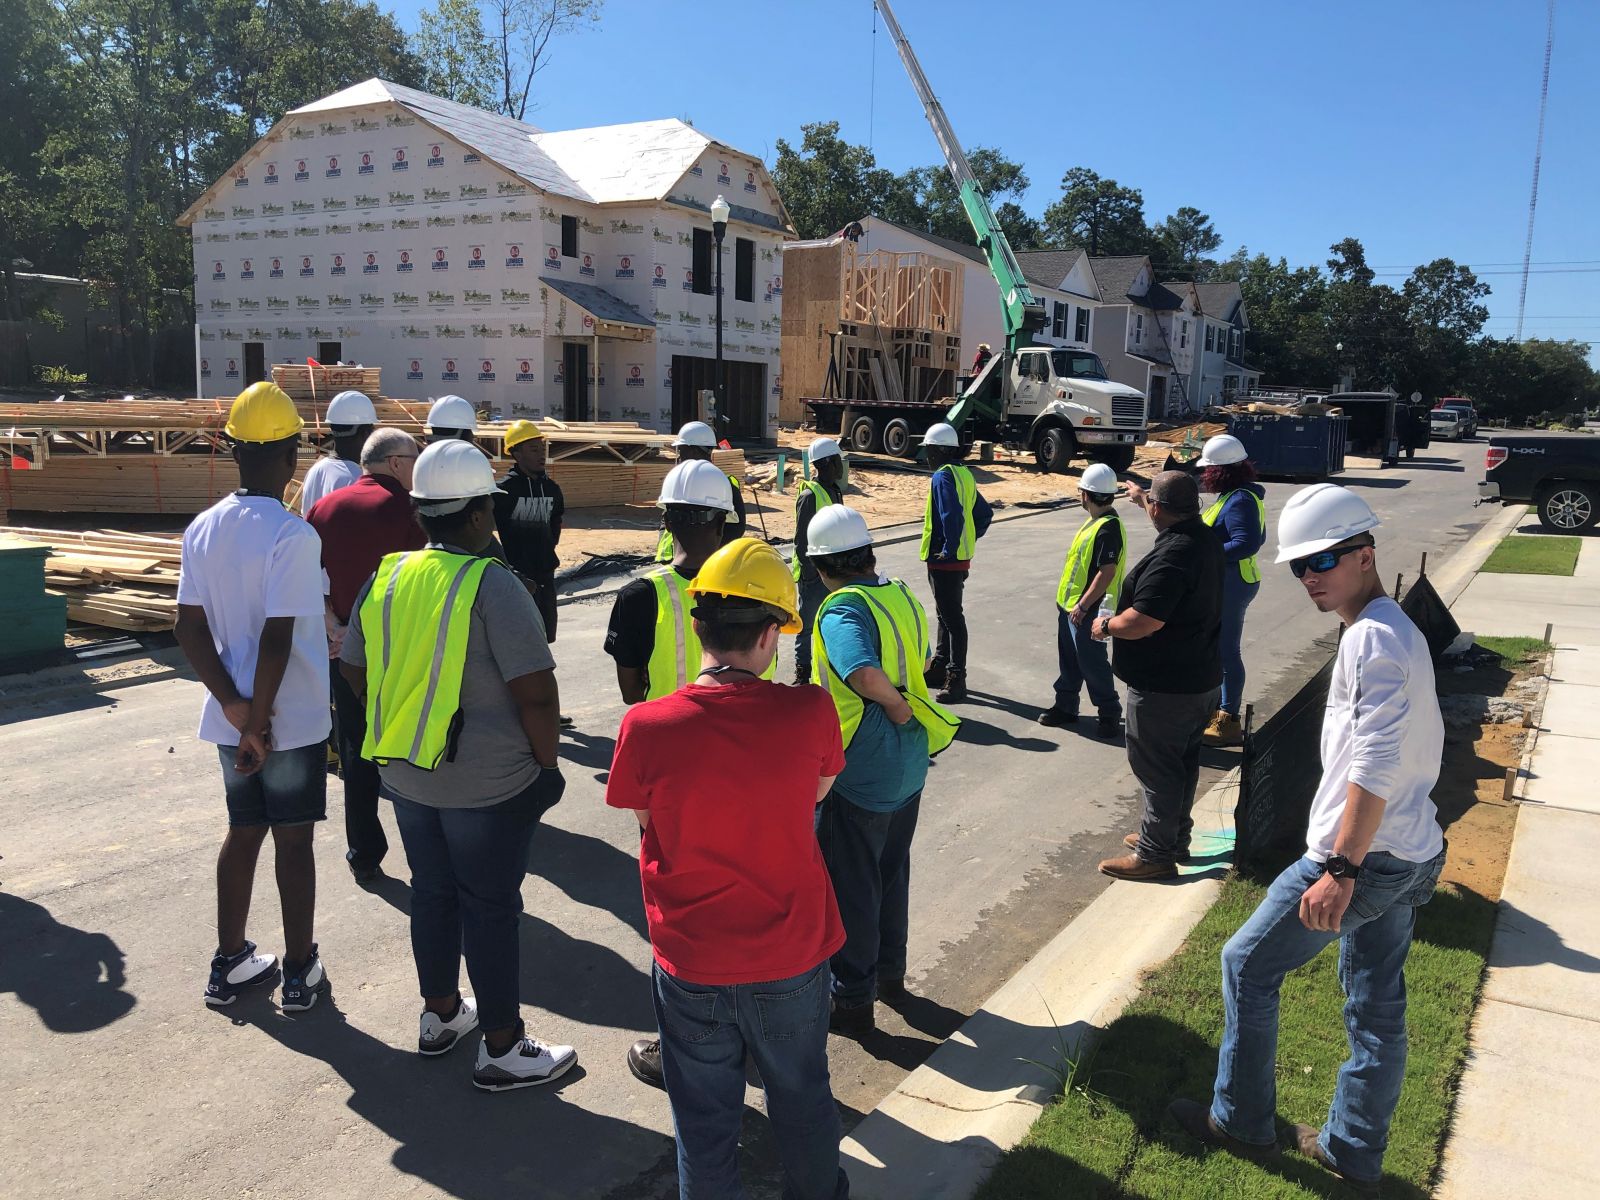 Students from Midlands Technical College's Building Occupational Opportunities in the Midlands program tour job sites with Great Southern Homes. (Photo/Mike Satterfield, Great Southern Homes)